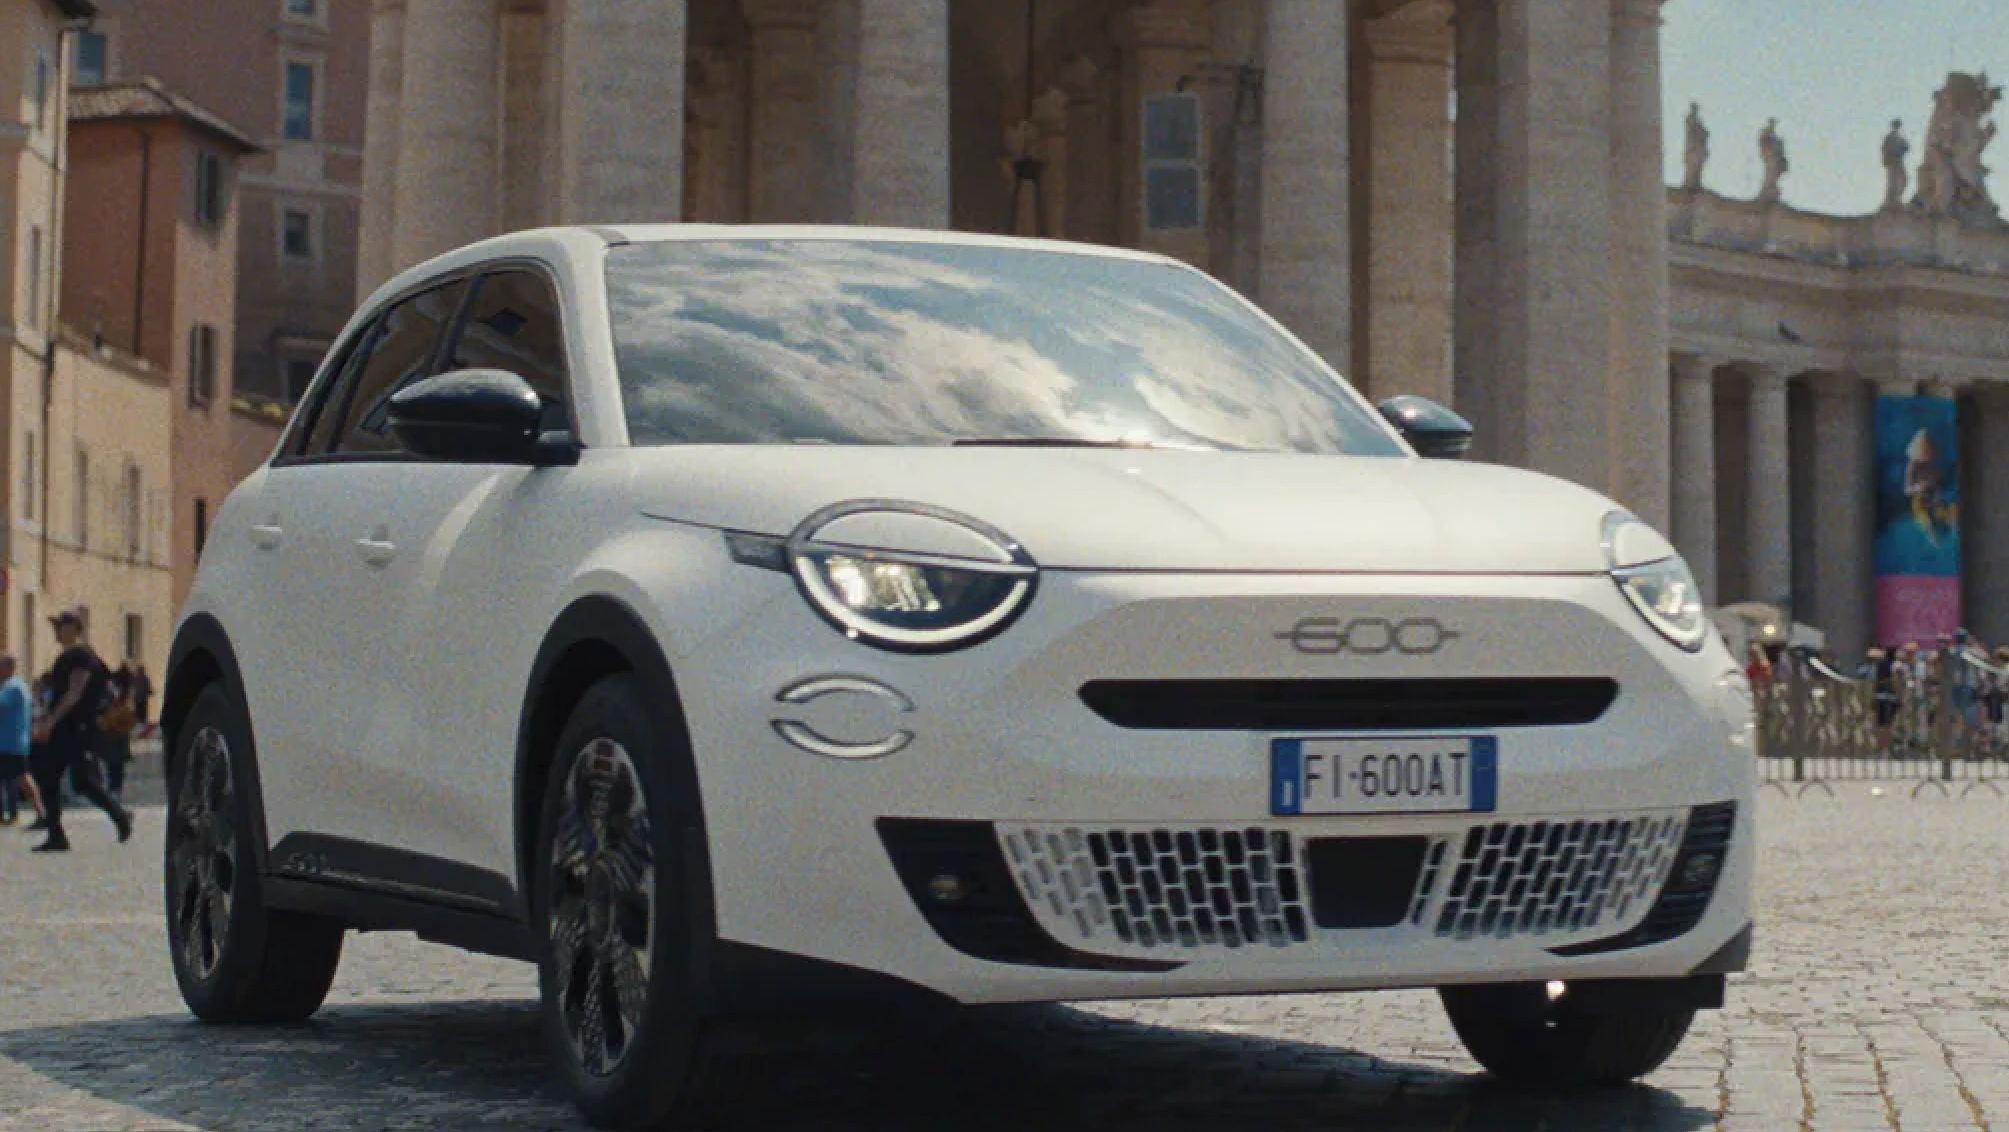 Fiat have recently released a video teasing the upcoming Fiat 600E